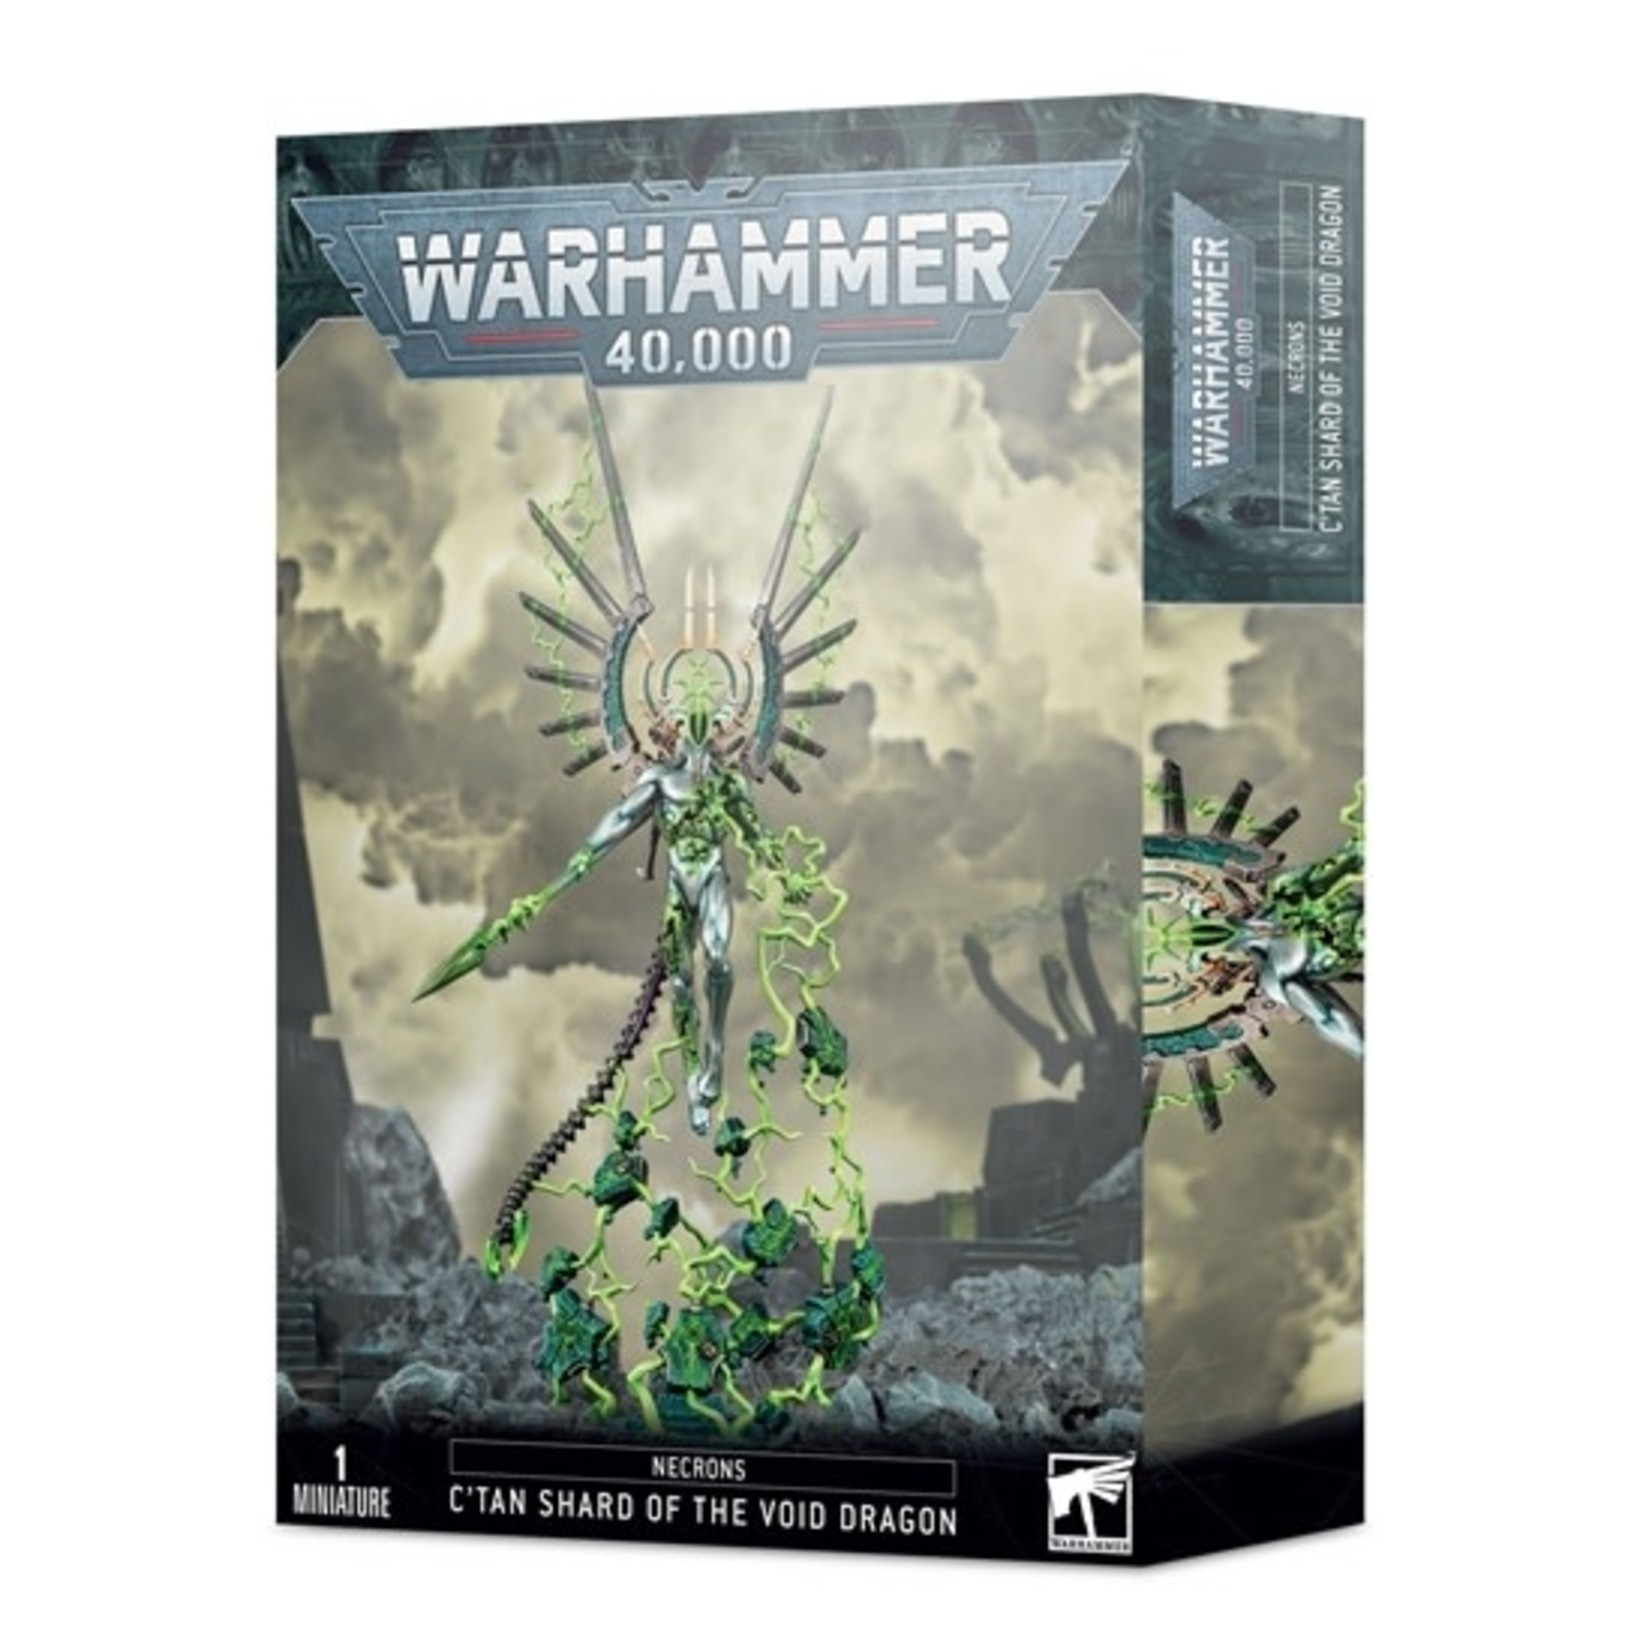 Necrons Necrons C'Tan Shard of the Void Dragon